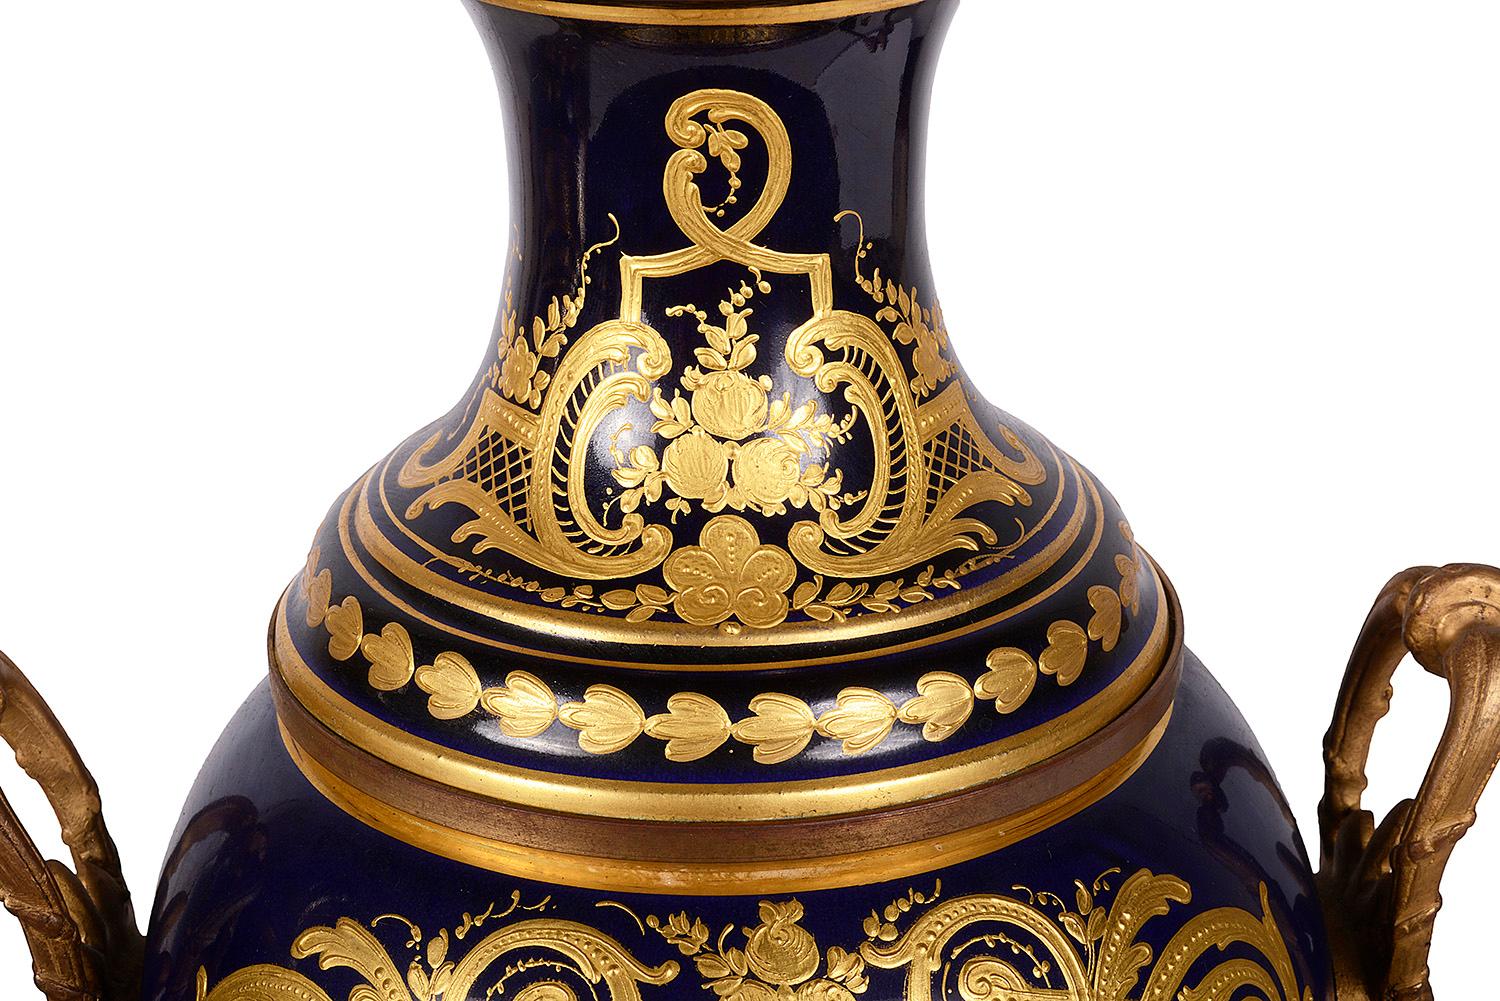 A good quality pair of late 19th century French Sevres style porcelain vases, each with classical gilded ormolu mask handles to either side, cobalt blue ground with gilded decoration, inset hand painted panels depicting romantic scenes.
Signed;